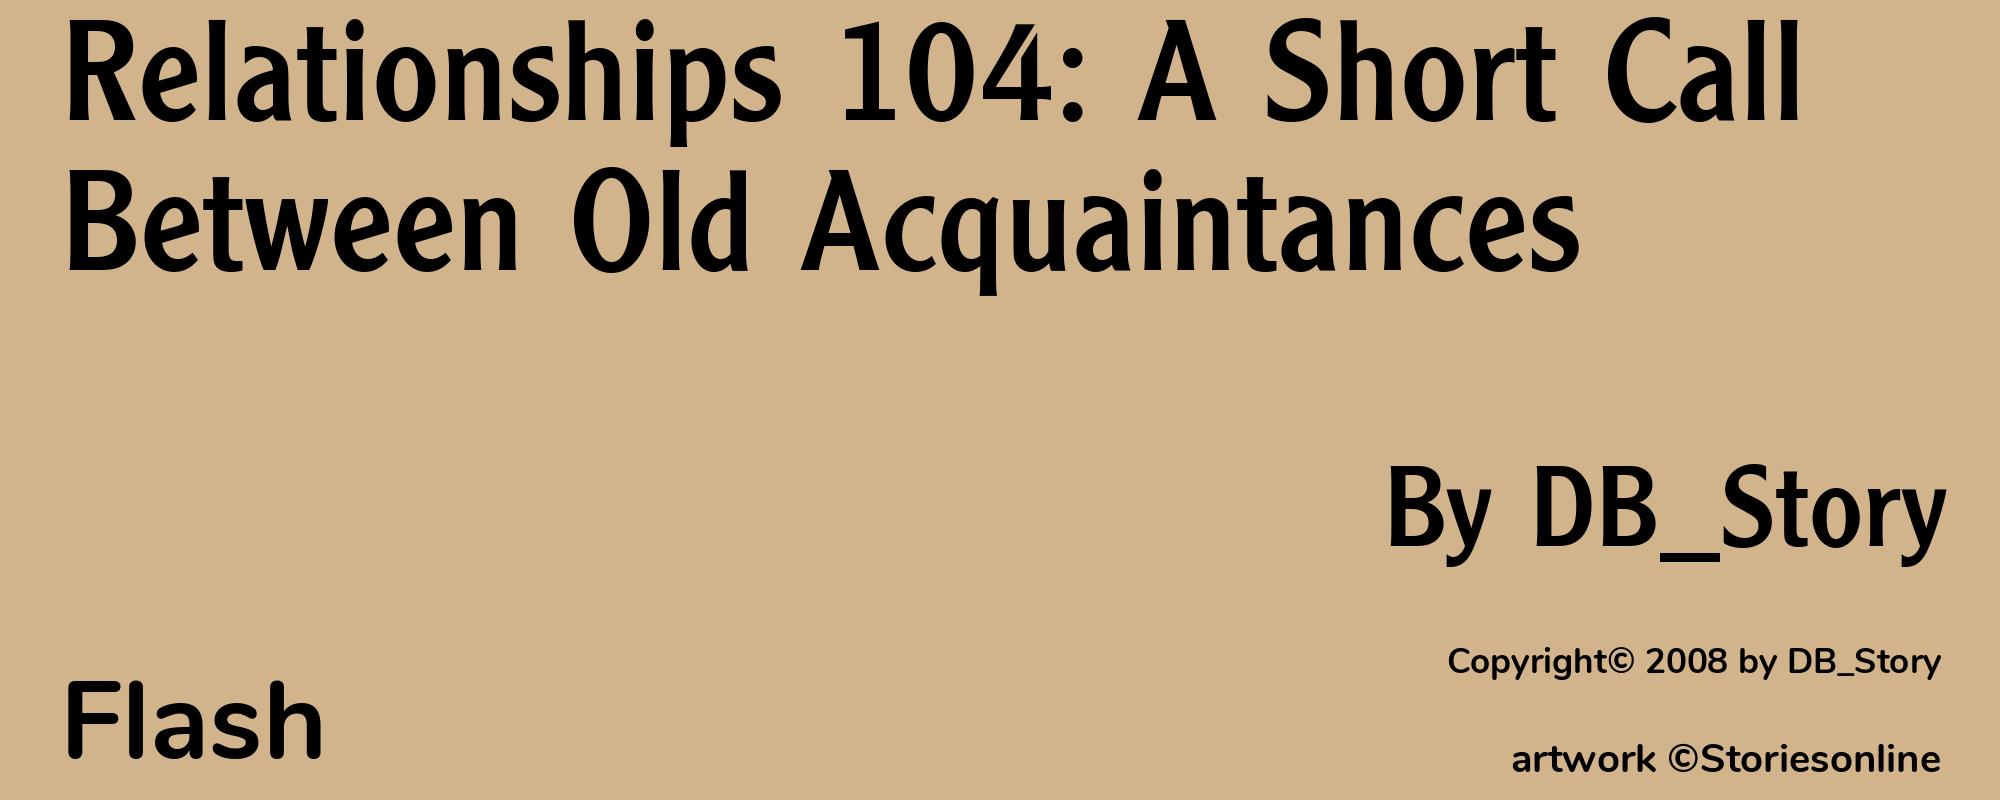 Relationships 104: A Short Call Between Old Acquaintances - Cover